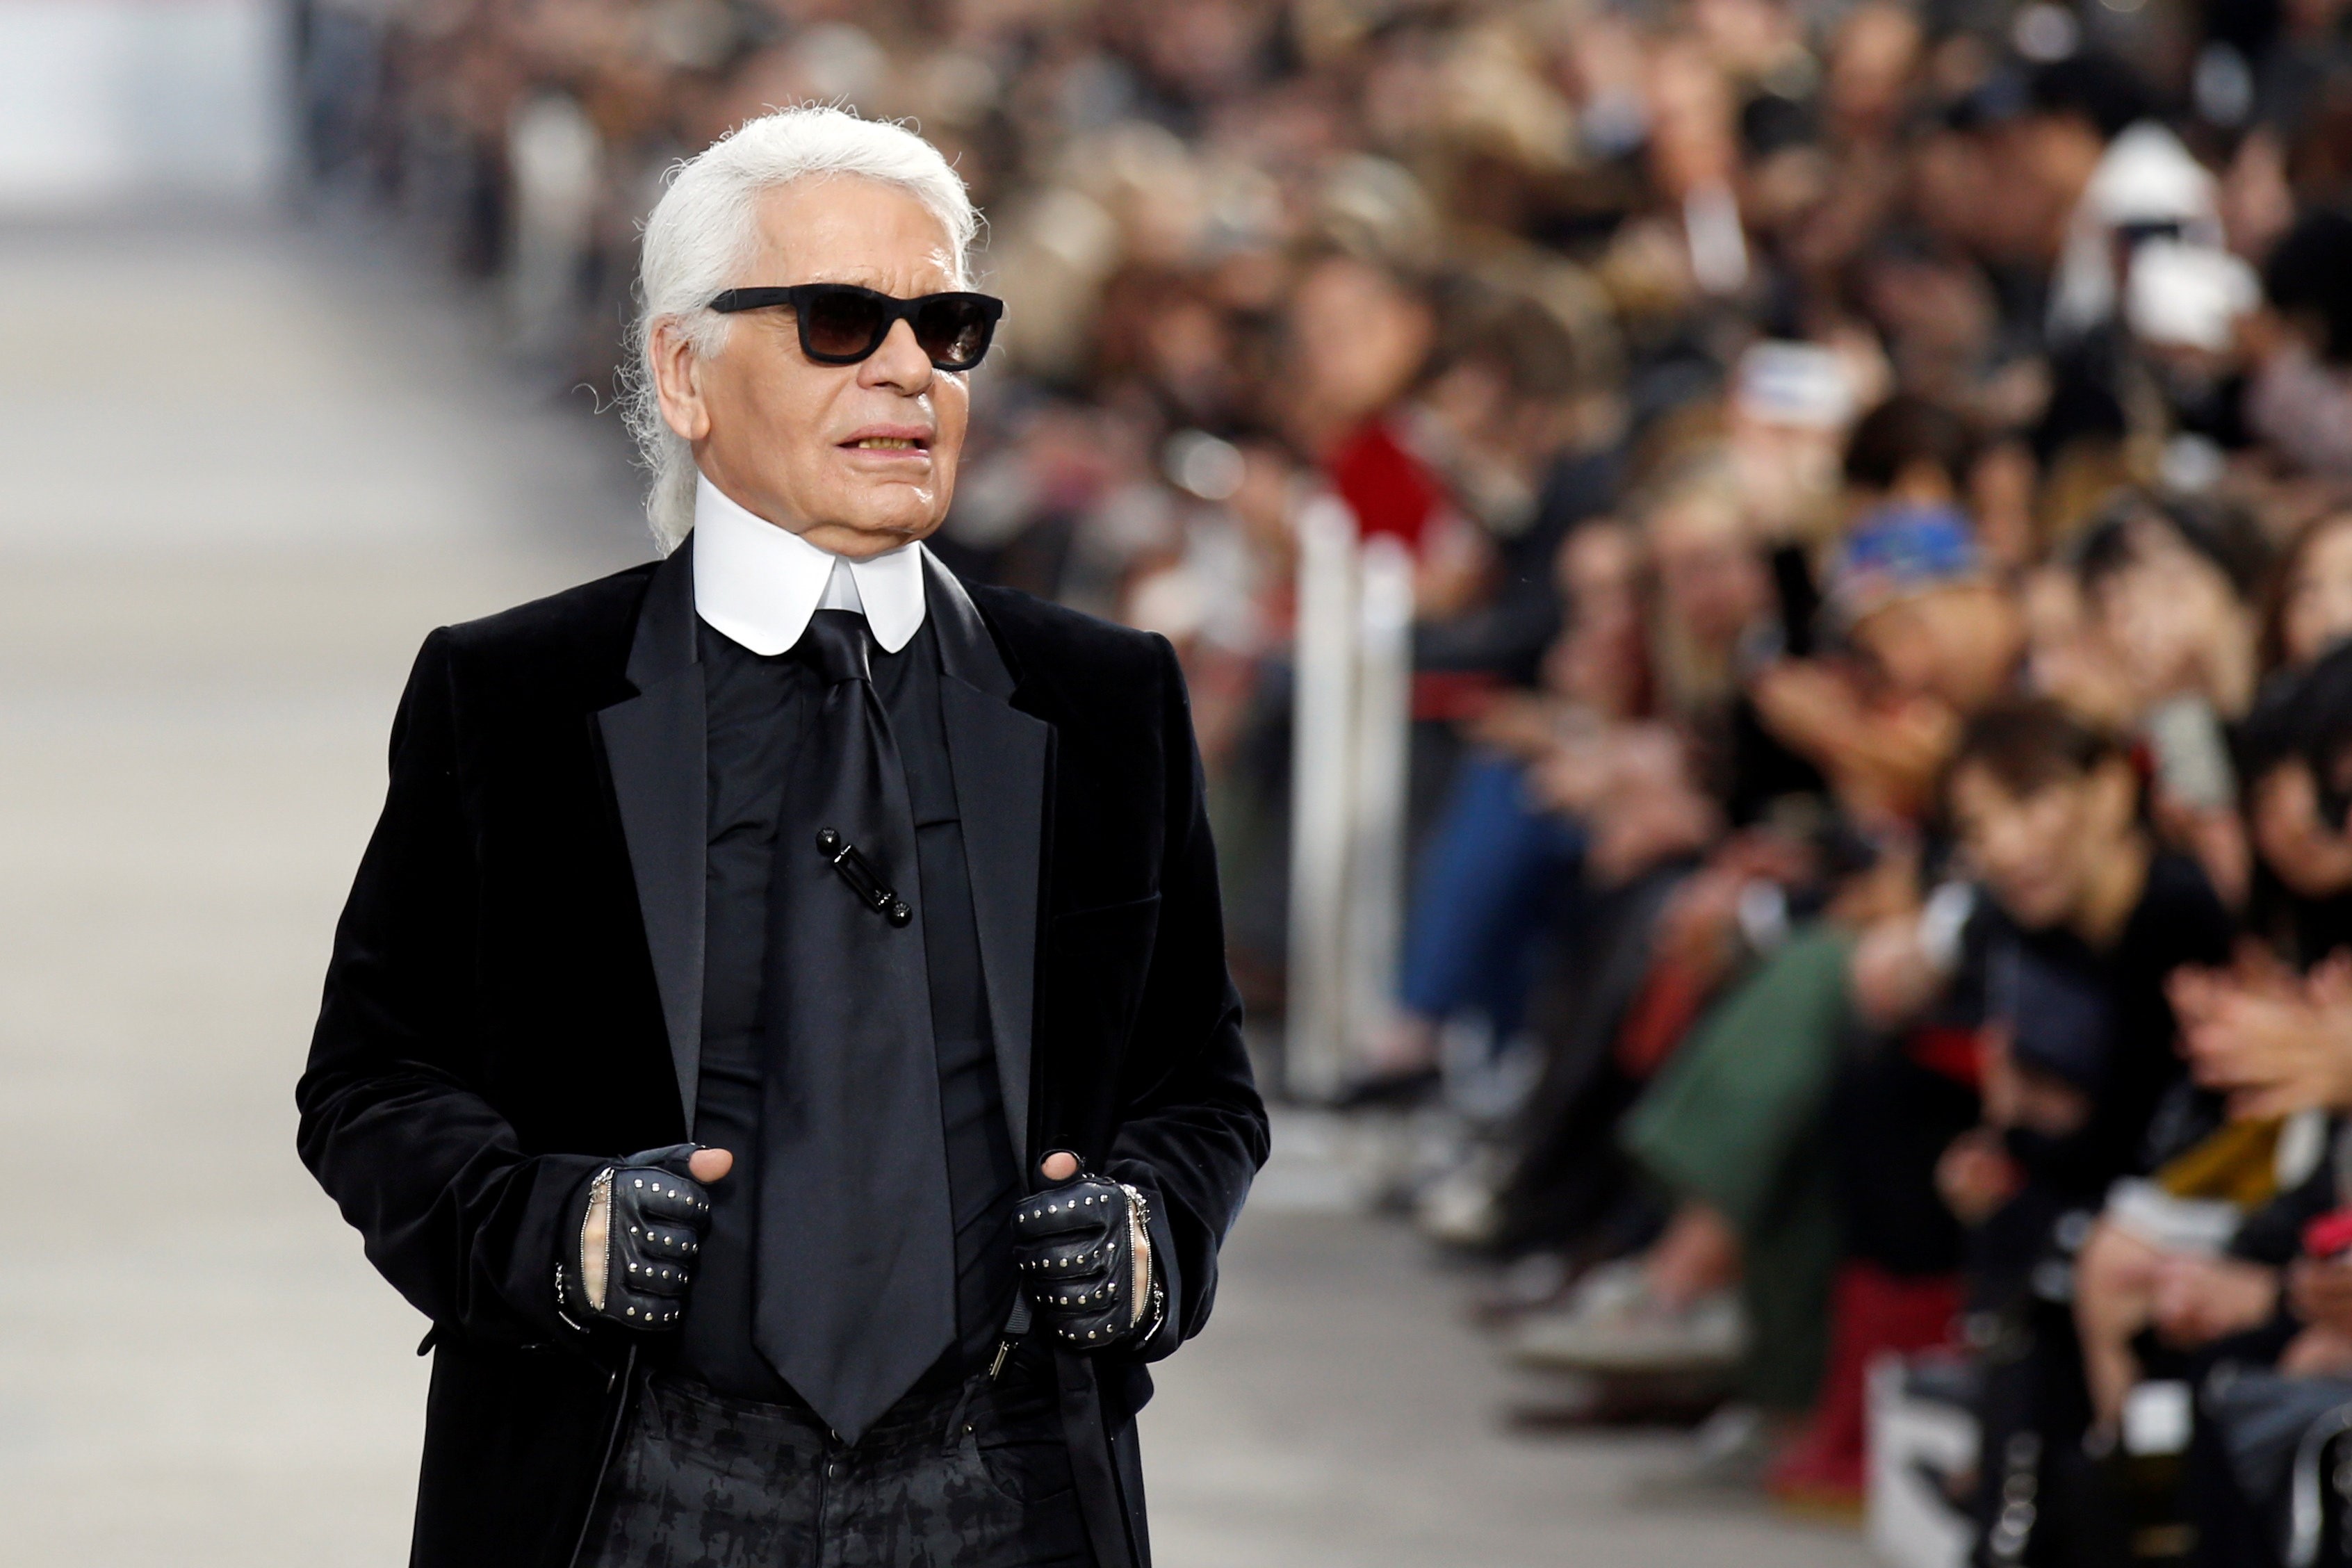 FILE PHOTO -  German designer Karl Lagerfeld appears at the end of his Spring/Summer 2014 women's ready-to-wear fashion show for French fashion house Chanel during Paris fashion week FILE PHOTO -  German designer Karl Lagerfeld appears at the end of his Spring/Summer 2014 women's ready-to-wear fashion show for French fashion house Chanel during Paris fashion week October 1, 2013. REUTERS/Benoit Tessier/File Photo Benoit Tessier